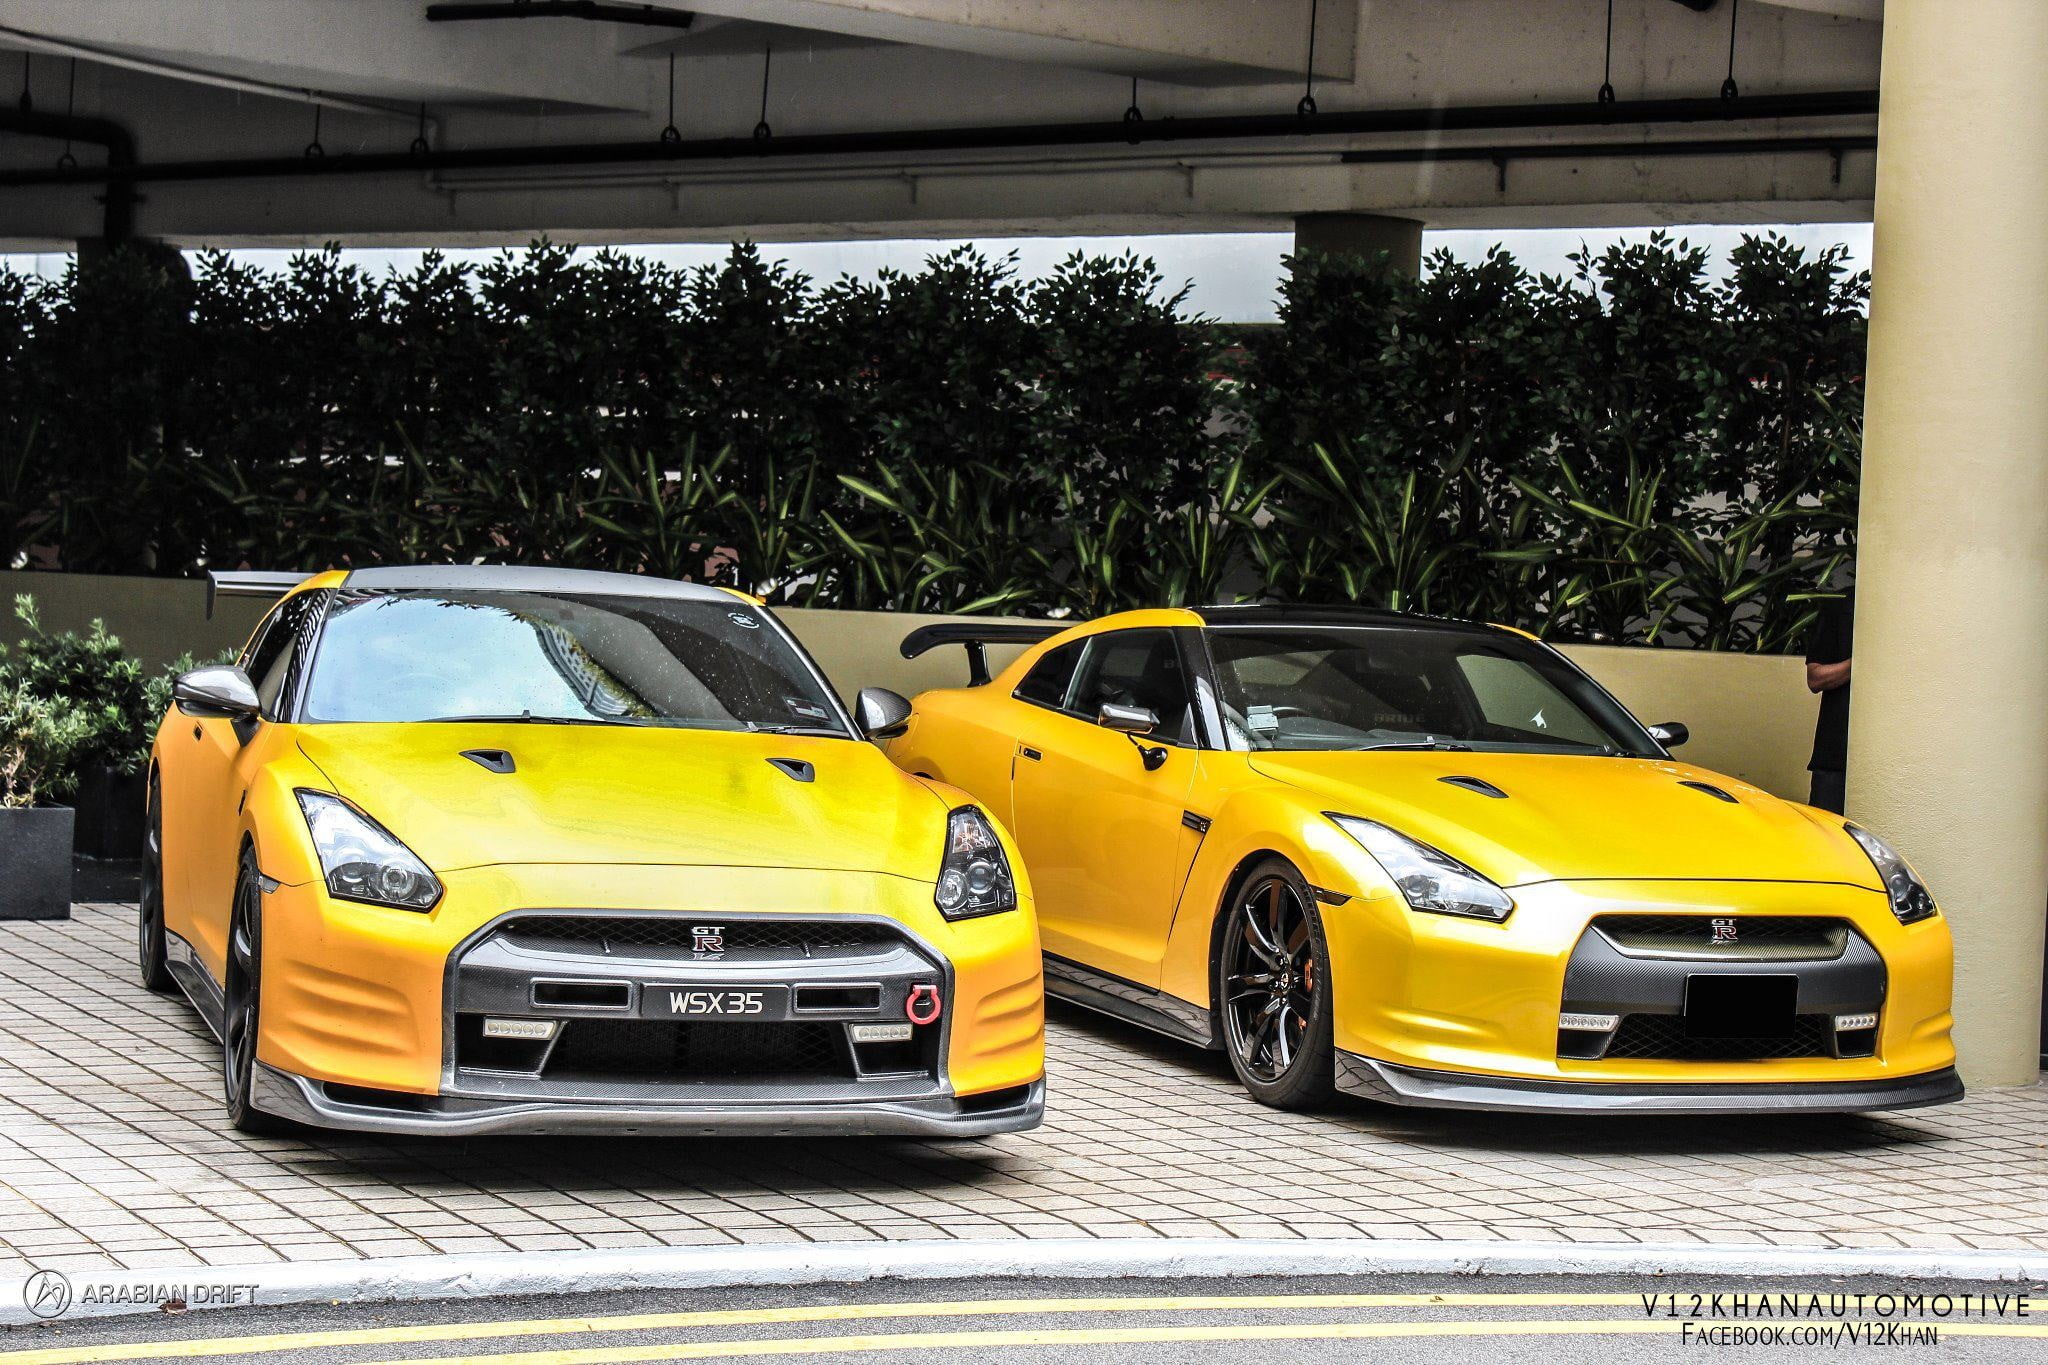 Two Yellow Nissan Gtr R 35 Car Nissan Yellow Cars Hd Wallpaper Images, Photos, Reviews